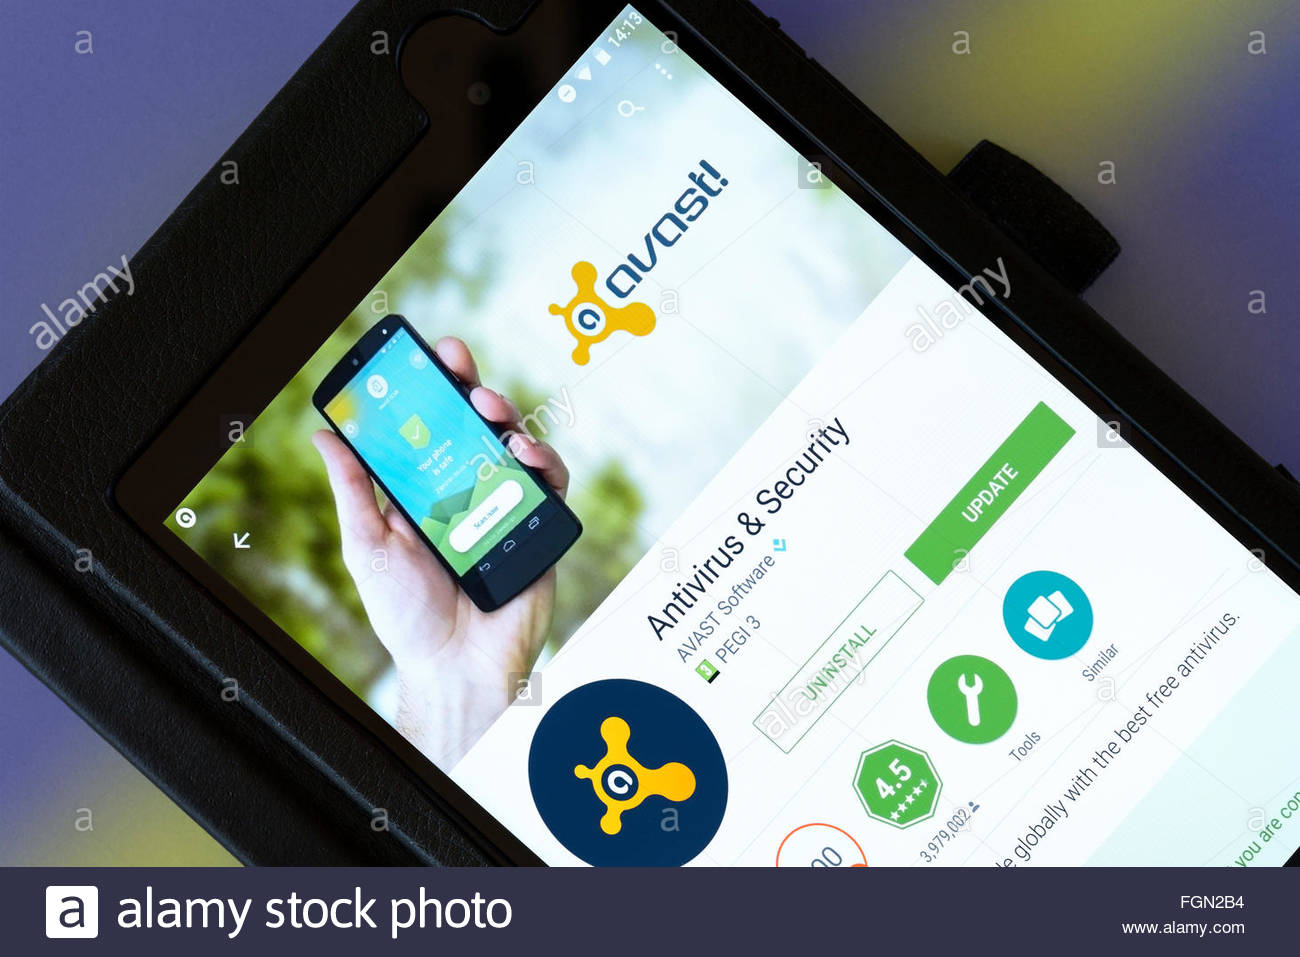 free avast antivirus software for android tablet